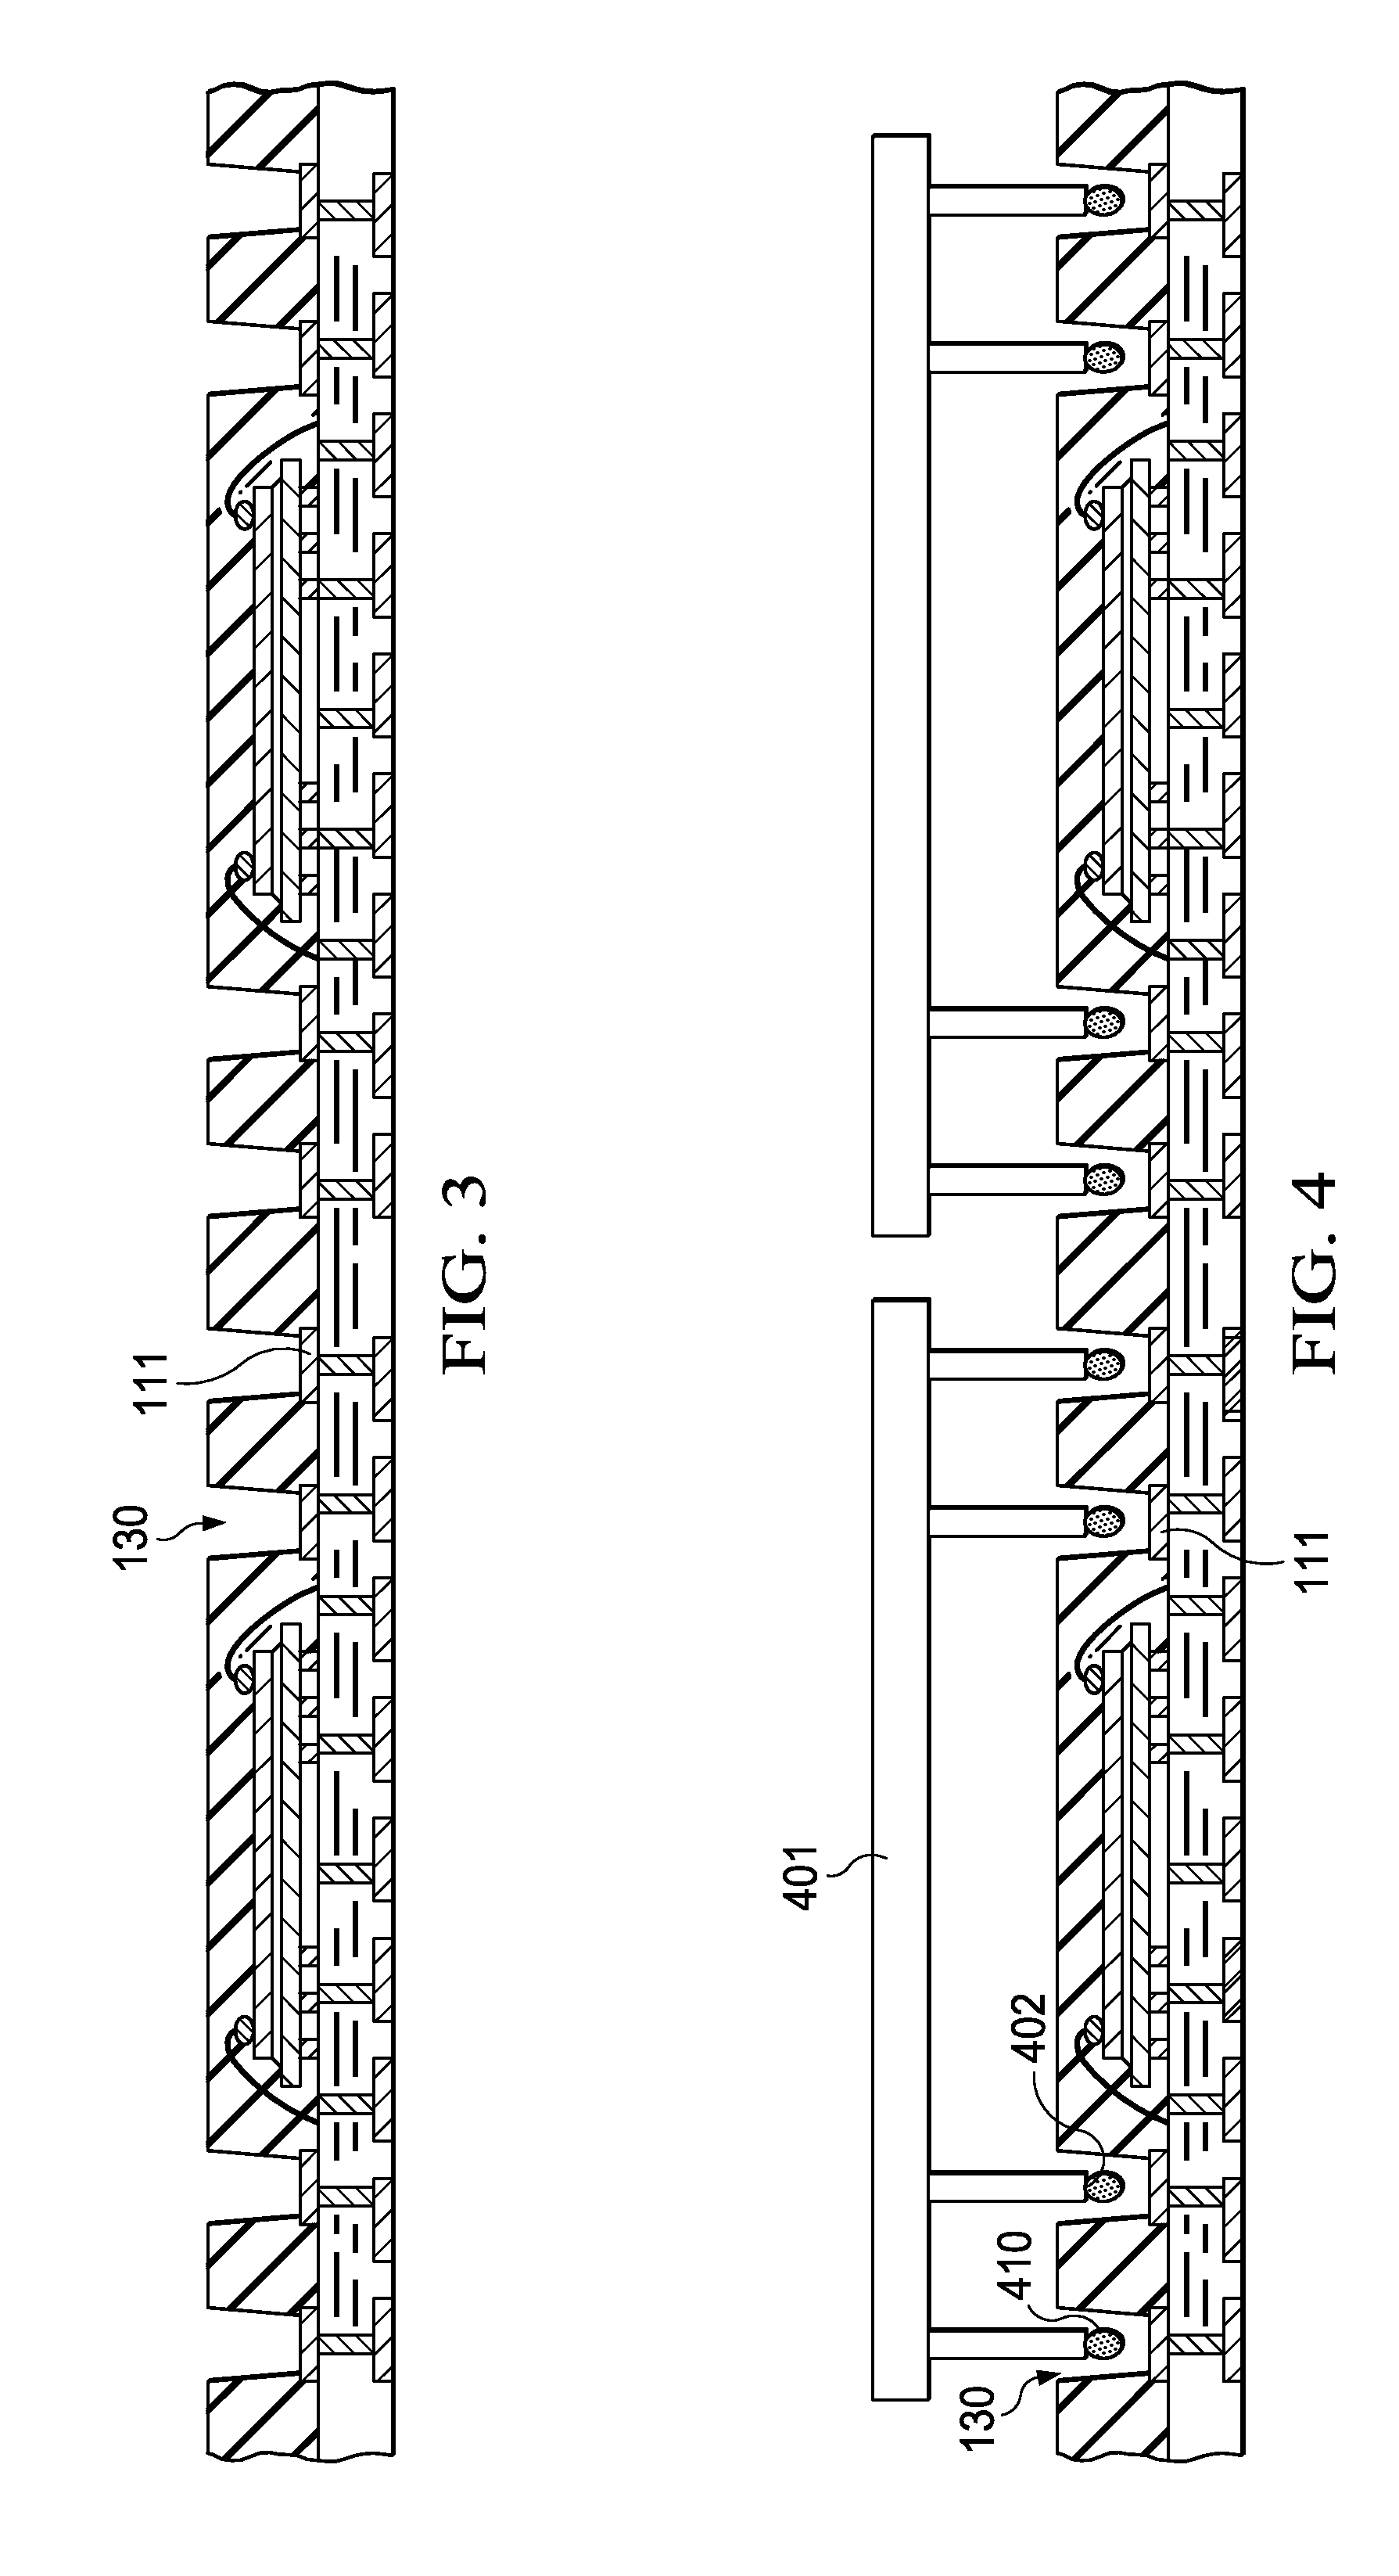 Fine-pitch oblong solder connections for stacking multi-chip packages